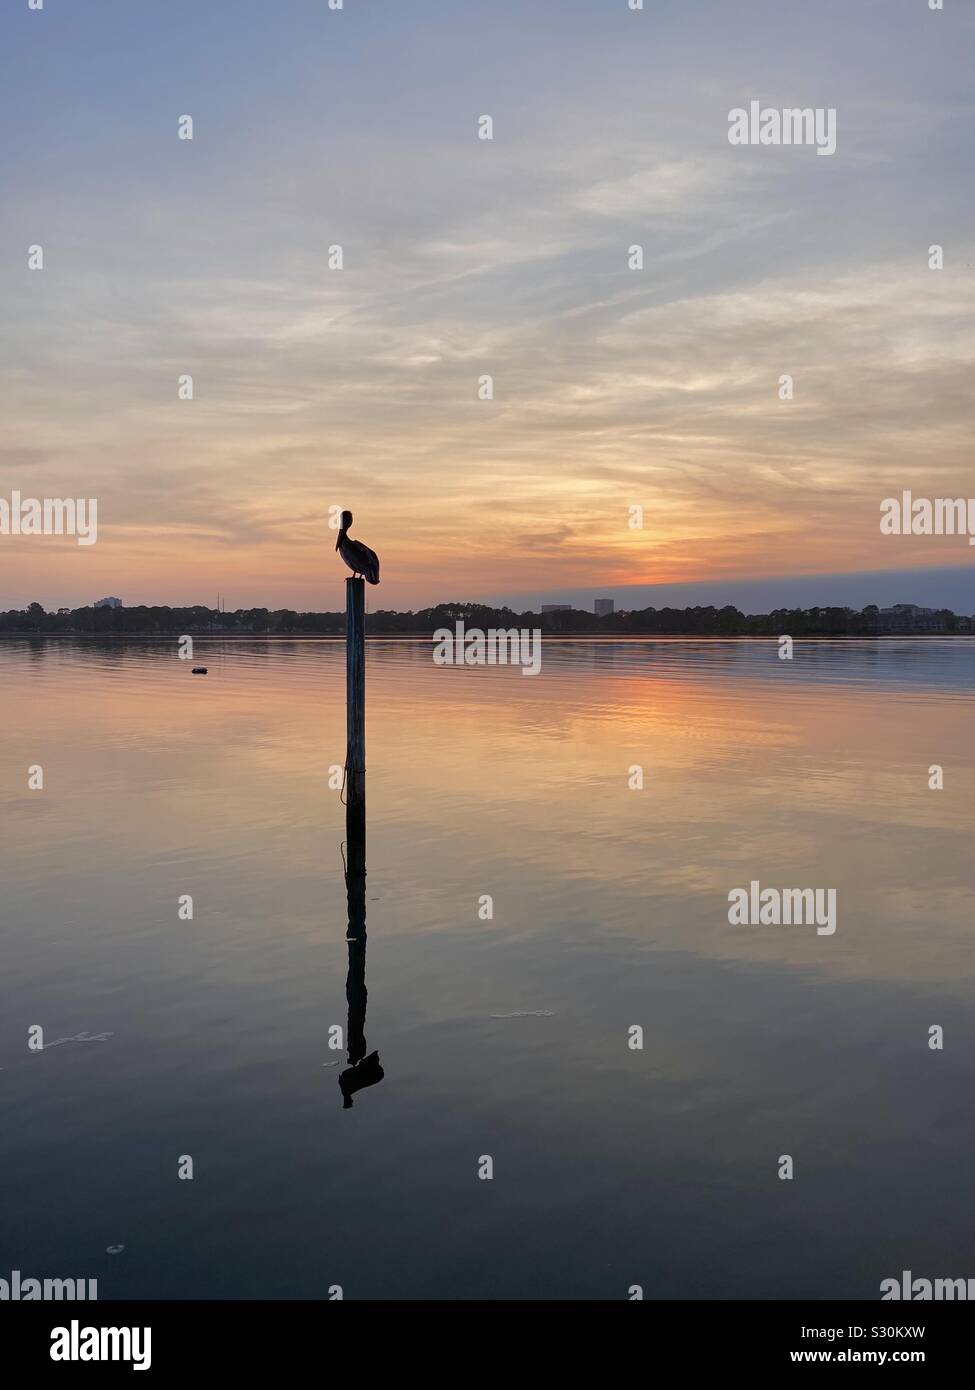 Sunset at the marina with pelican silhouette on a pole in the water Stock Photo